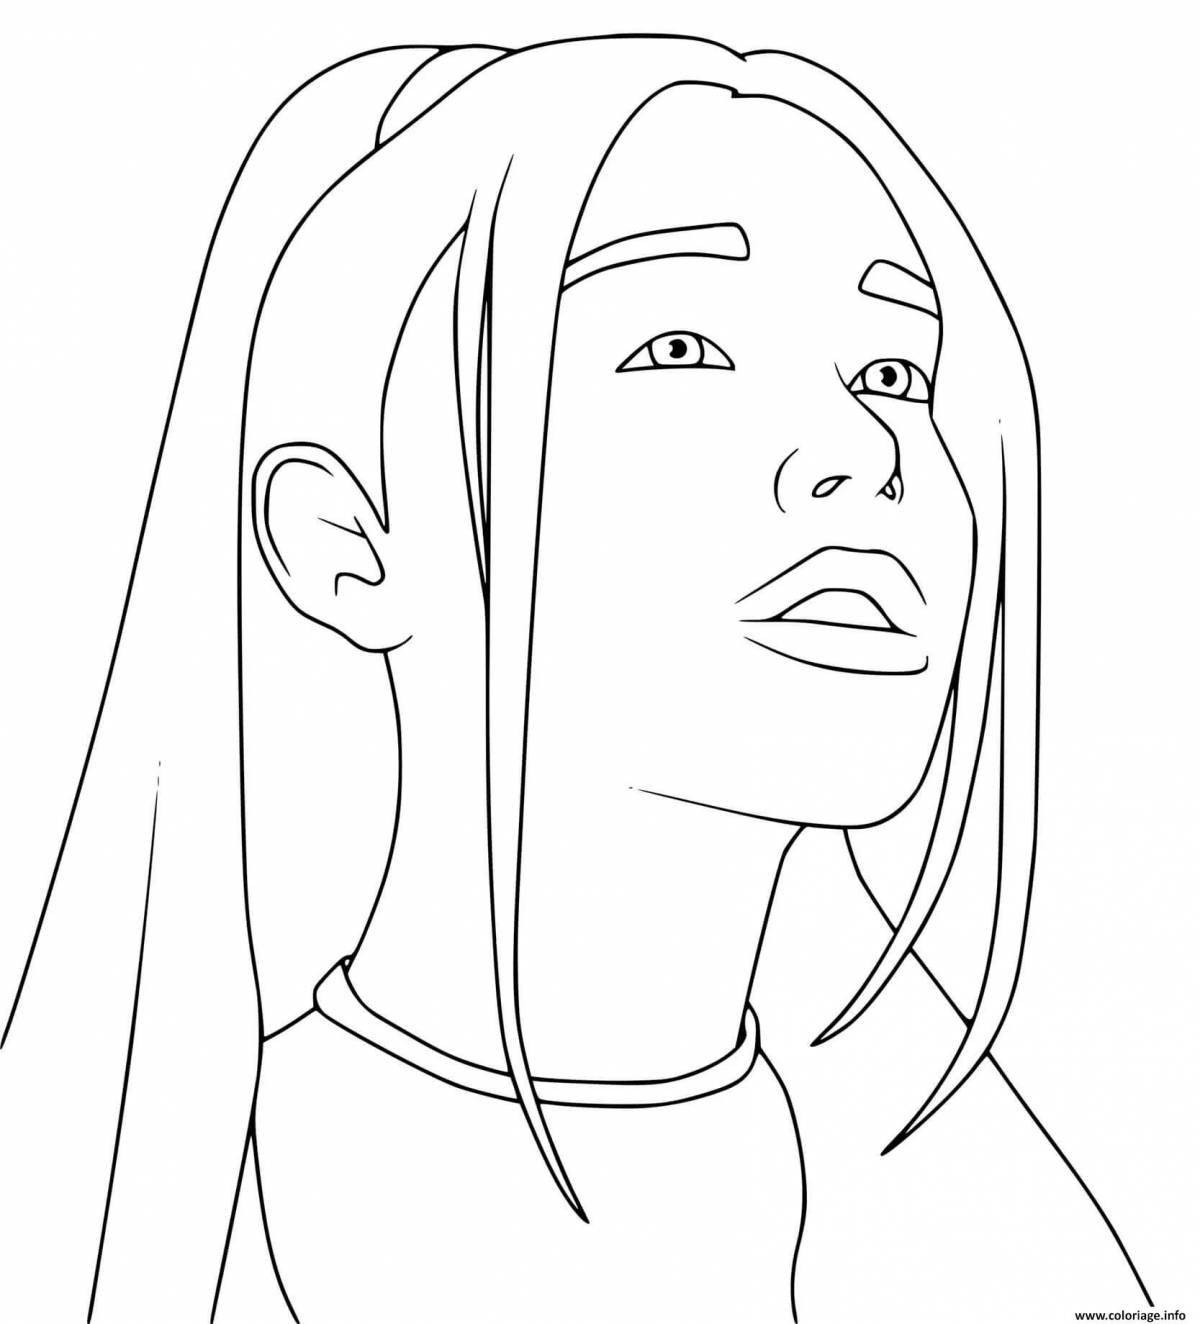 Ariana Grande's fabulous coloring page